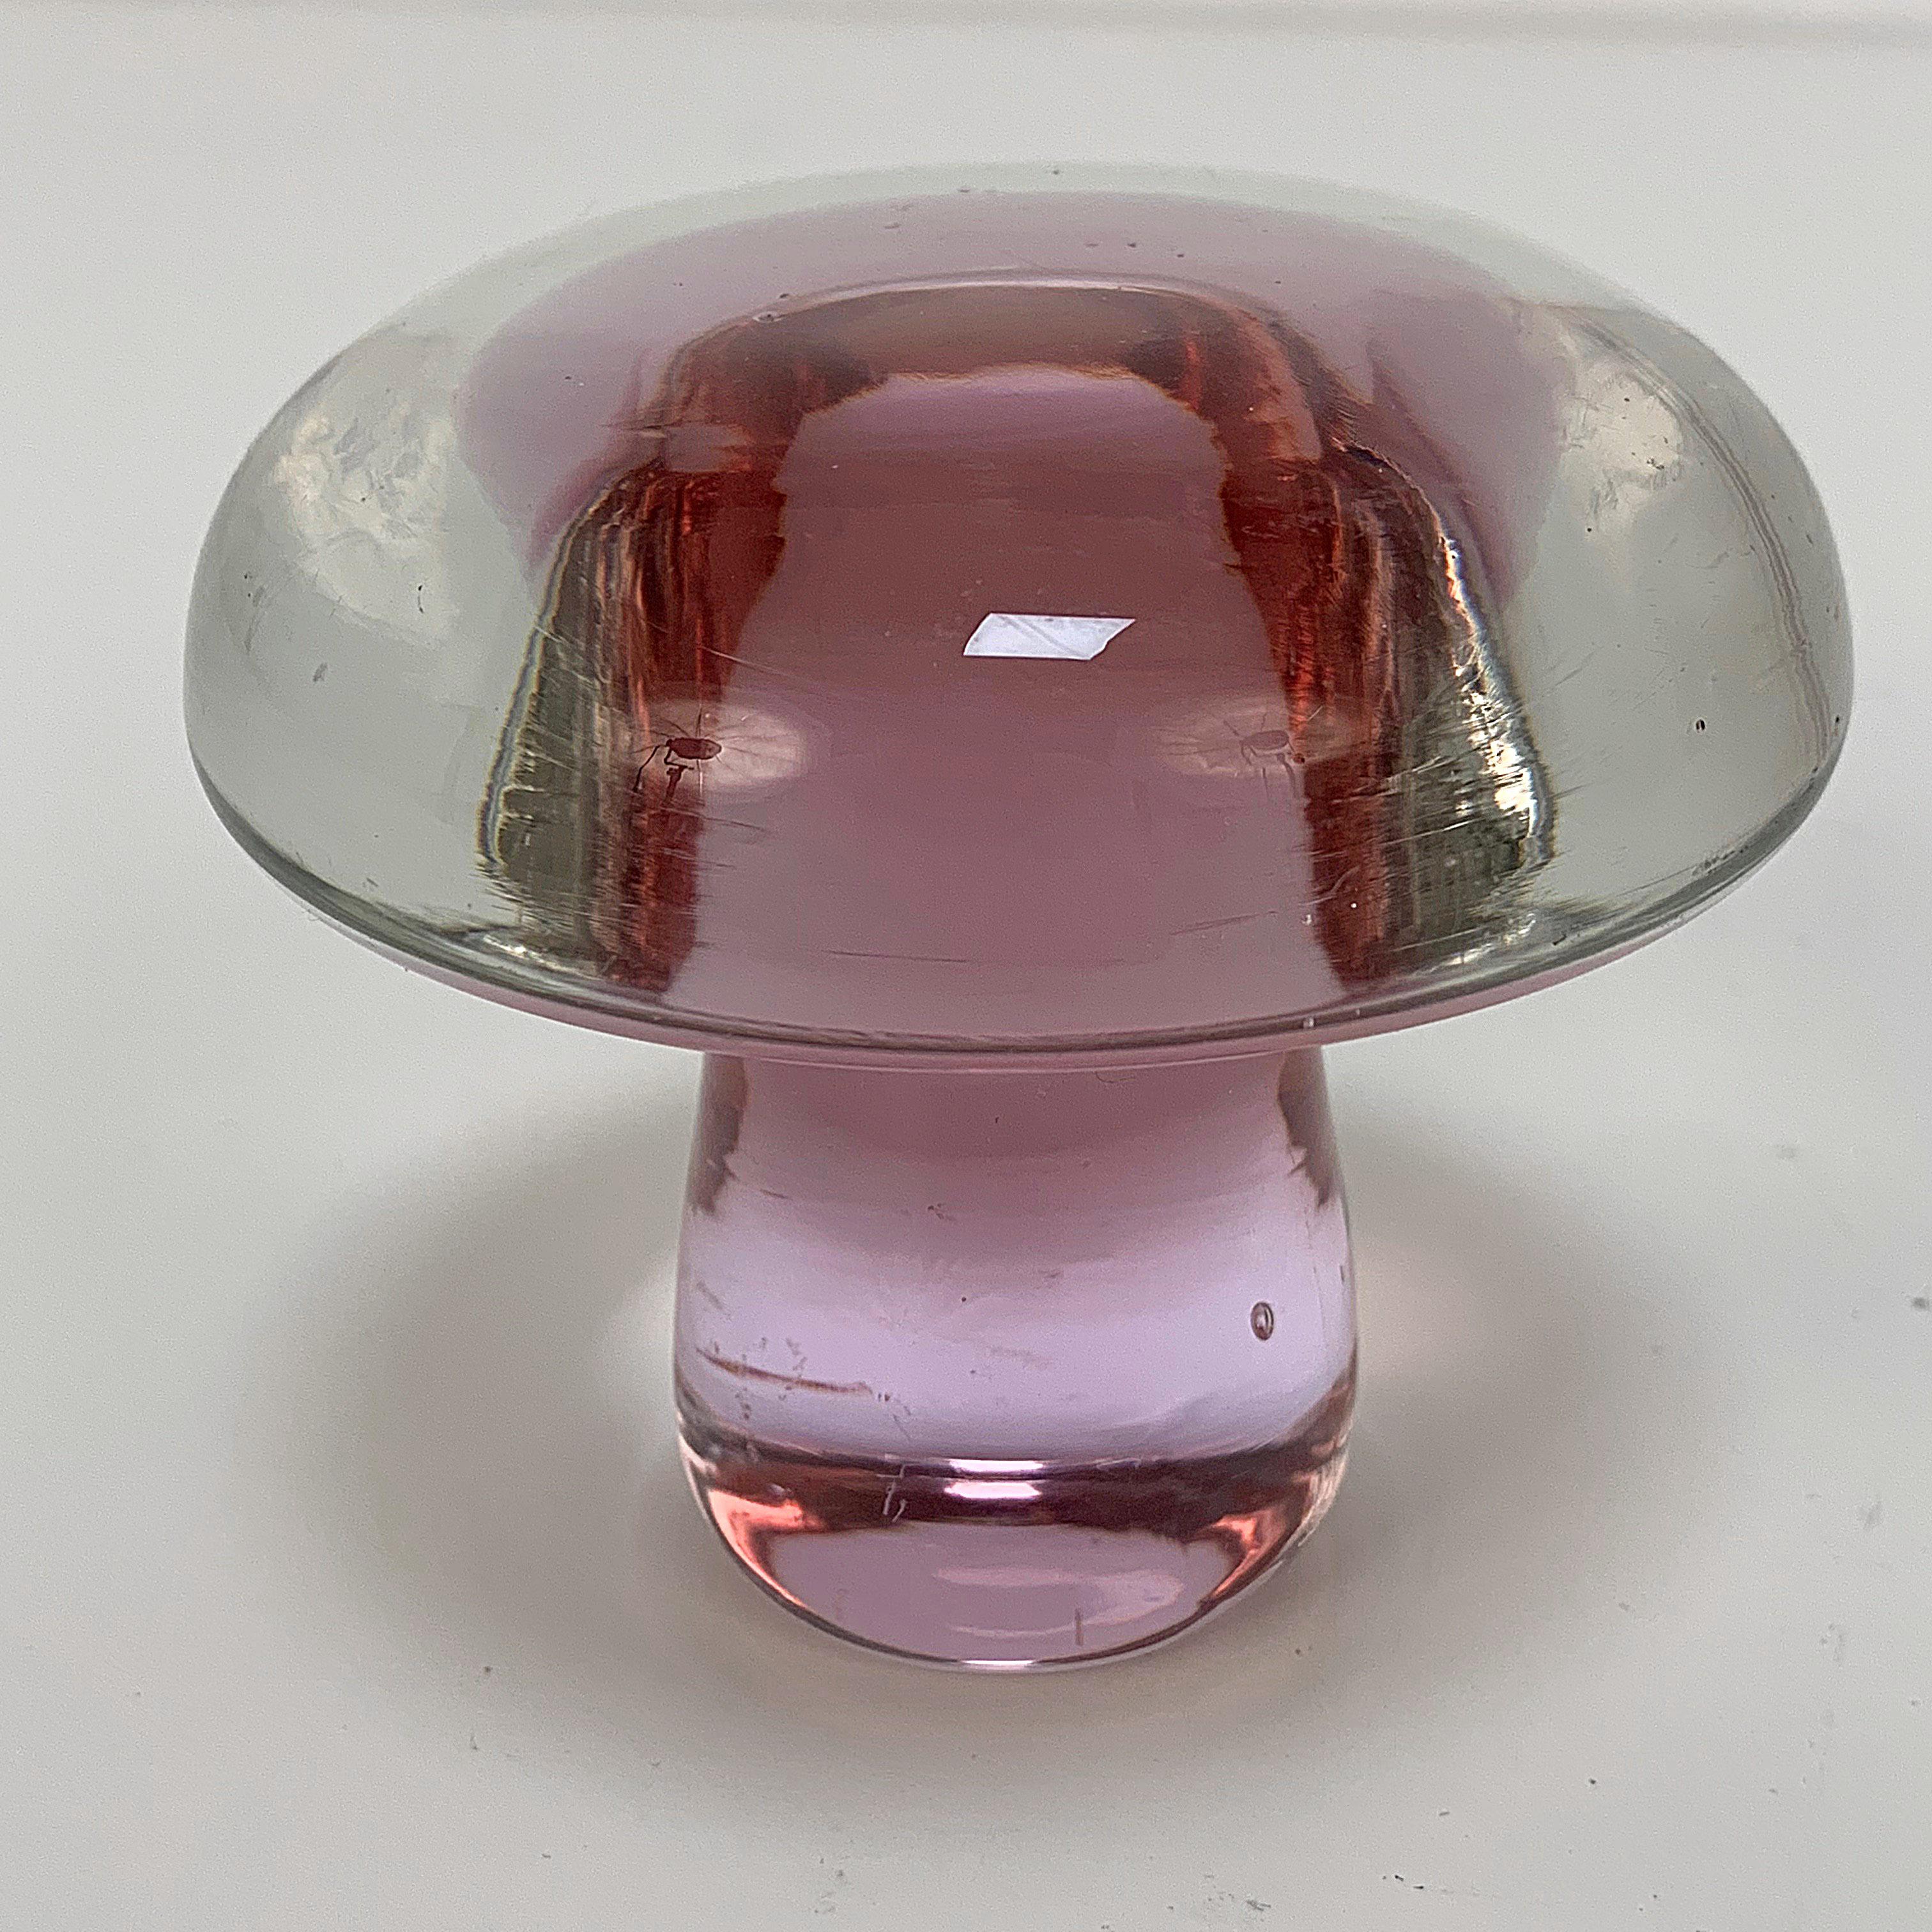 Murano glass paperweight in the shape of a mushroom, Italy 1960s. Pink glass.